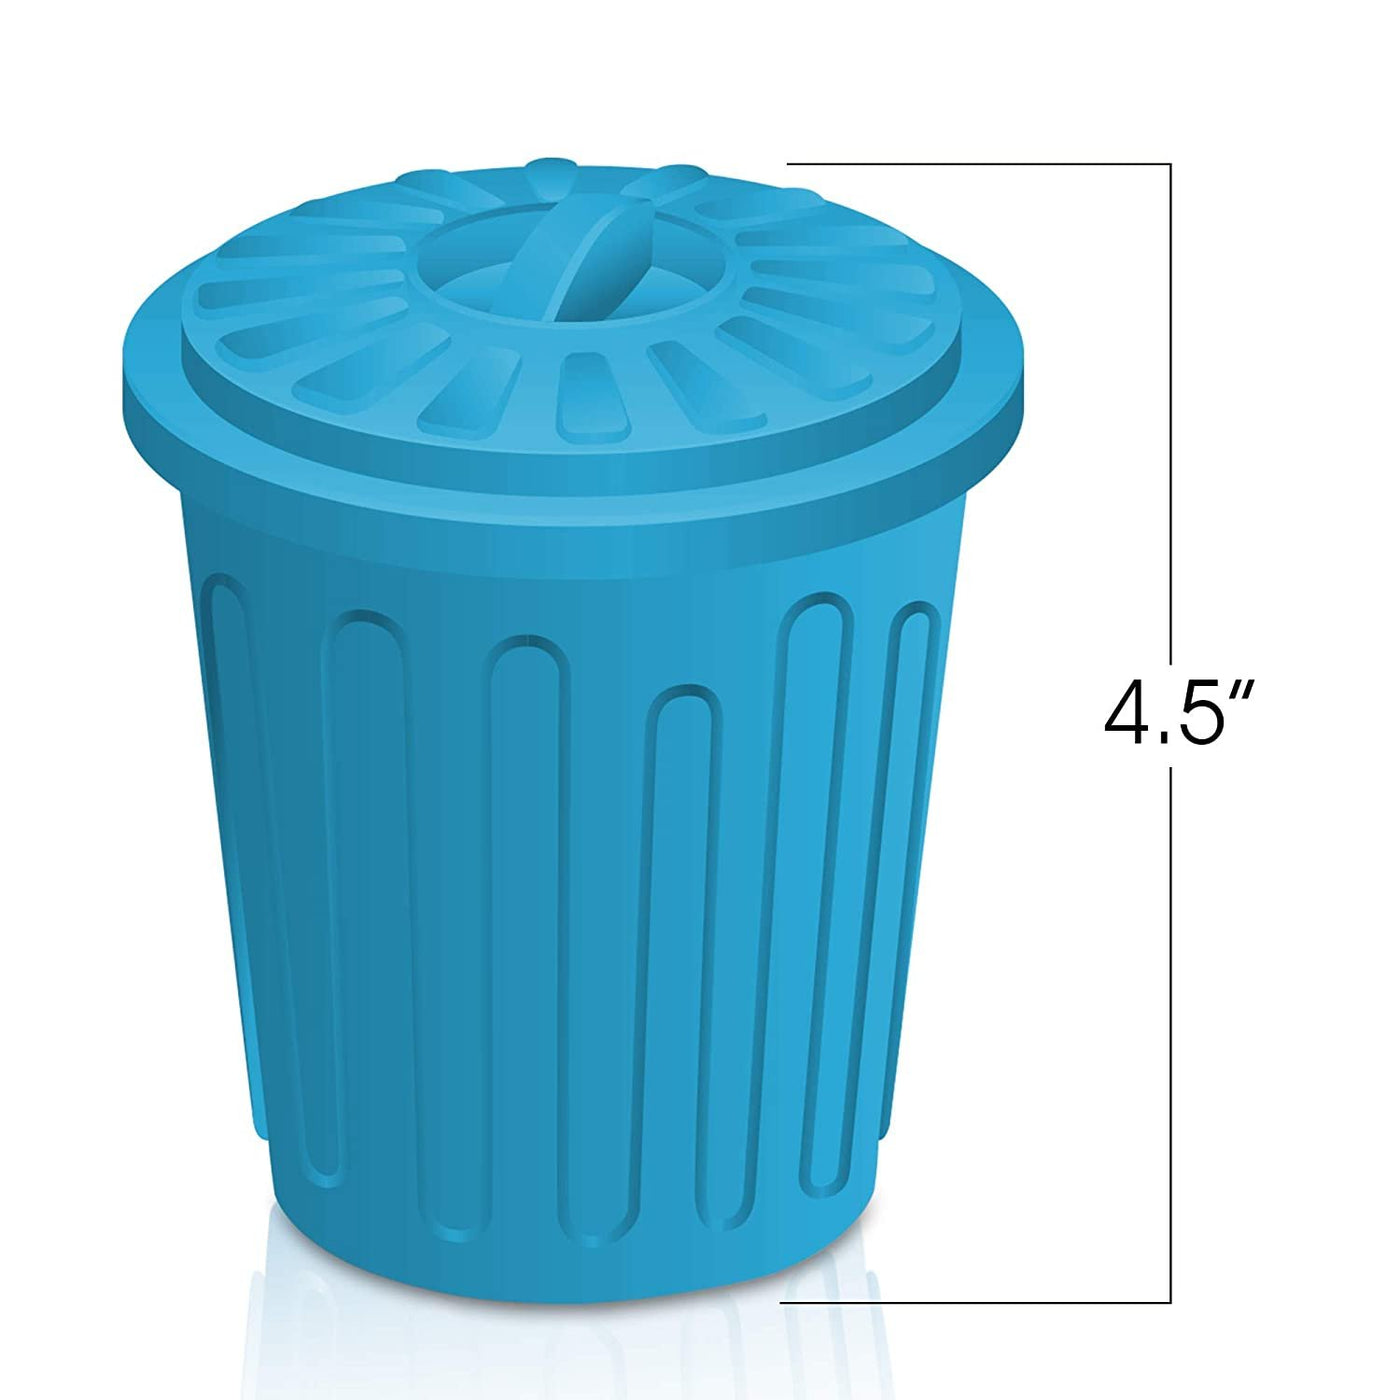 4.5" Mini Trash Can Set - 12 Pack - Miniature Garbage Bin Toy in Assorted Colors - Unique Desk Organizer - Birthday Party Favors for Boys and Girls, Classroom Decor, Carnival Prize